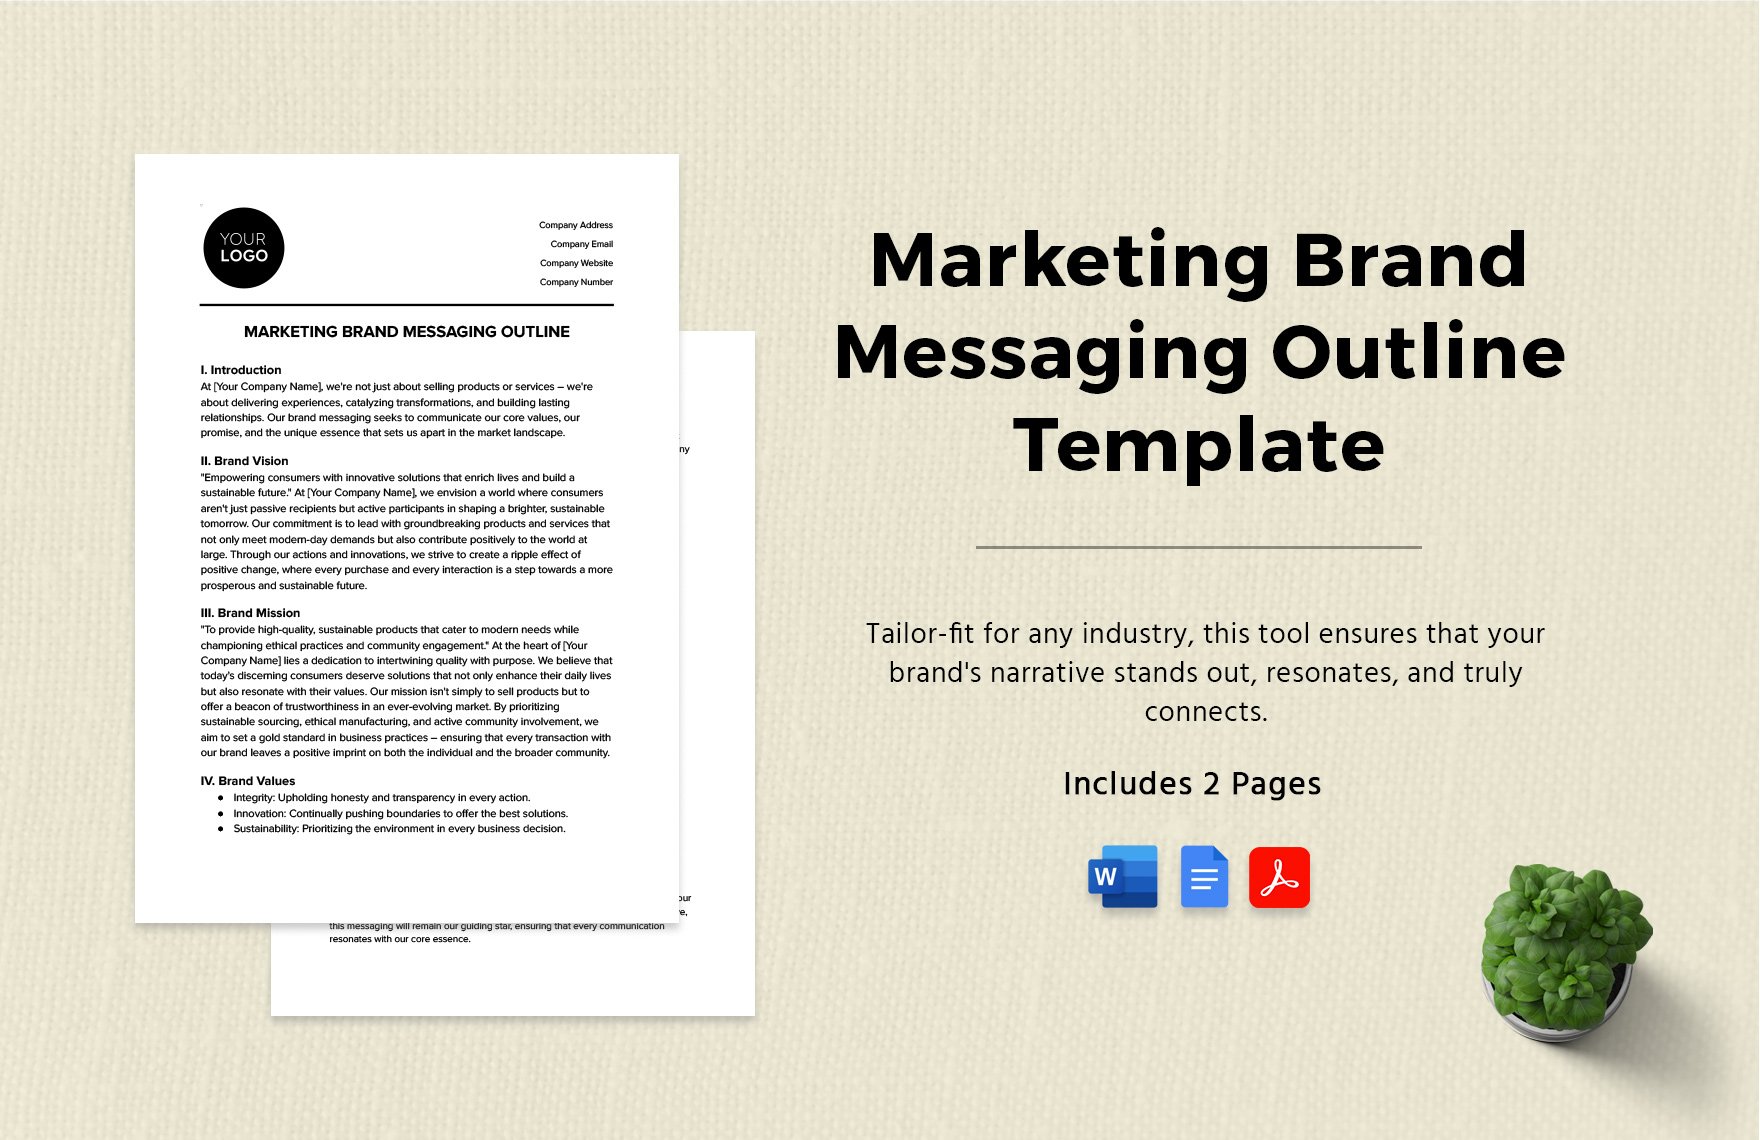 Marketing Brand Messaging Outline Template in Word, Google Docs, PDF